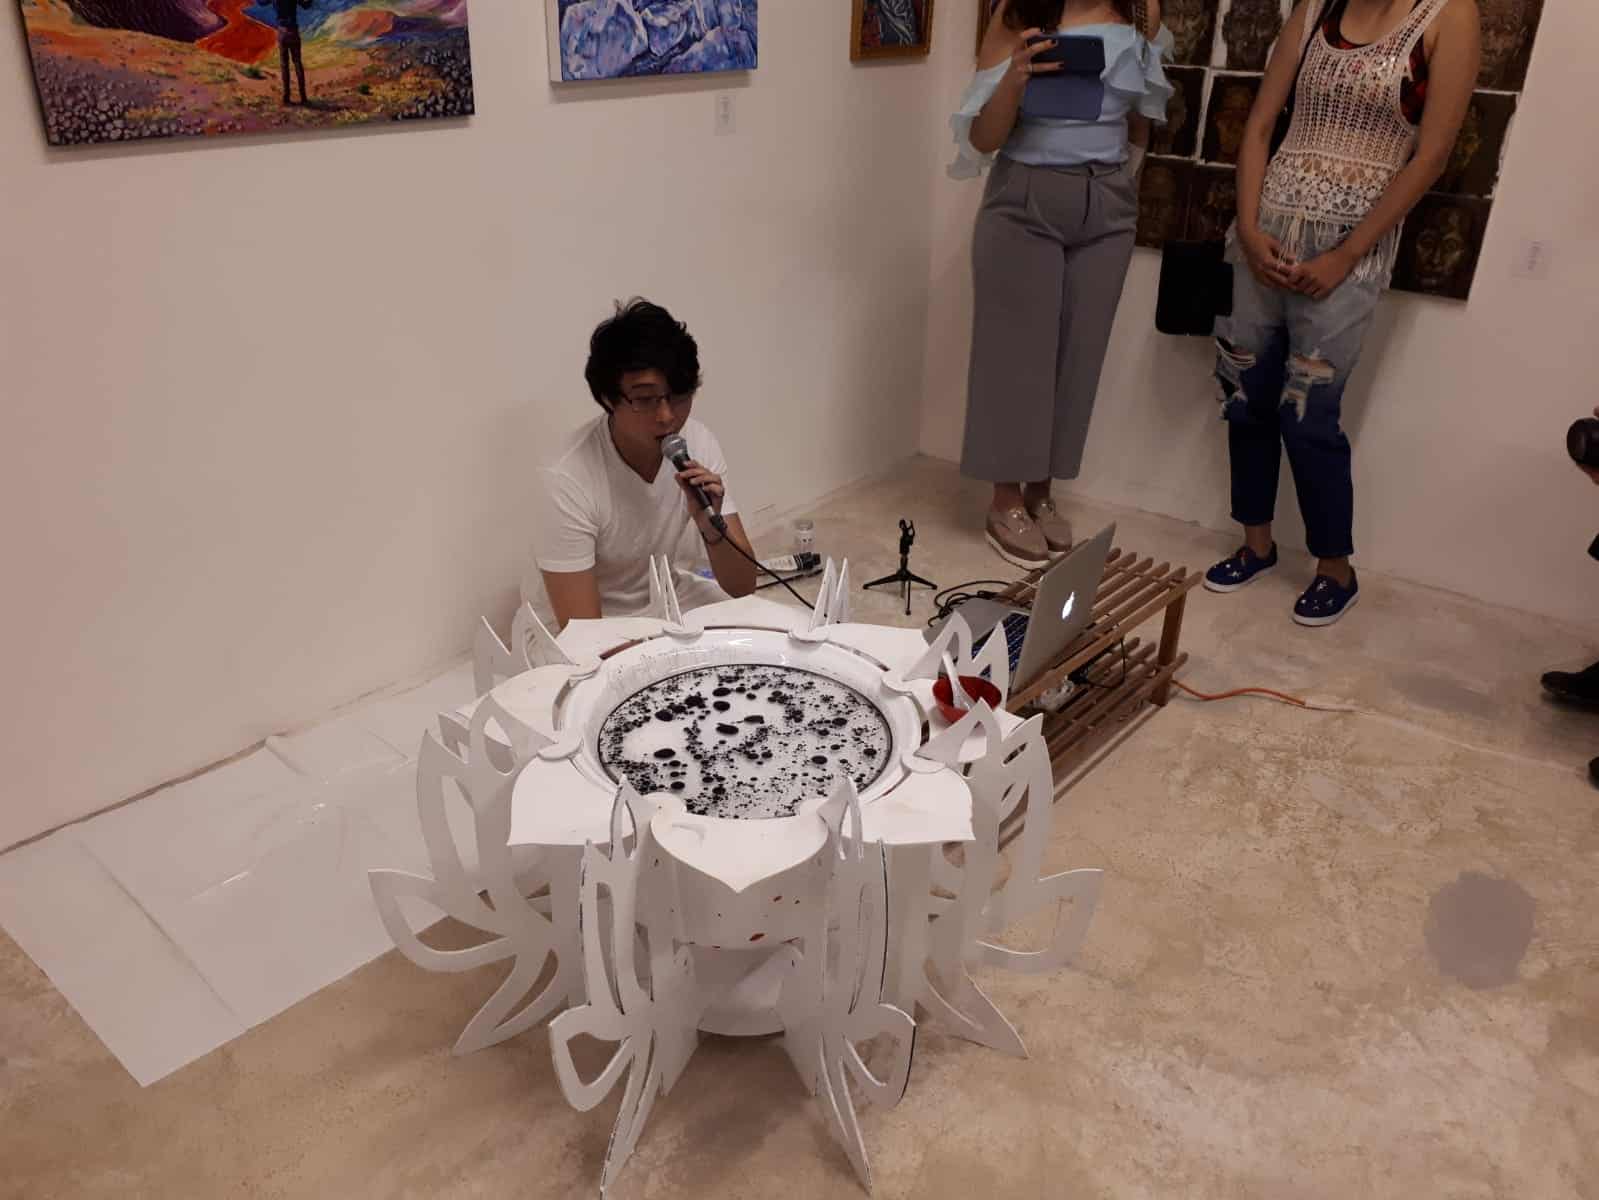 Jireh Koh presenting Anāhata (2018-), an ongoing series of sound and visual art installations and performances using cymatics, as part of the Wu Wei performance series #4 in 2019